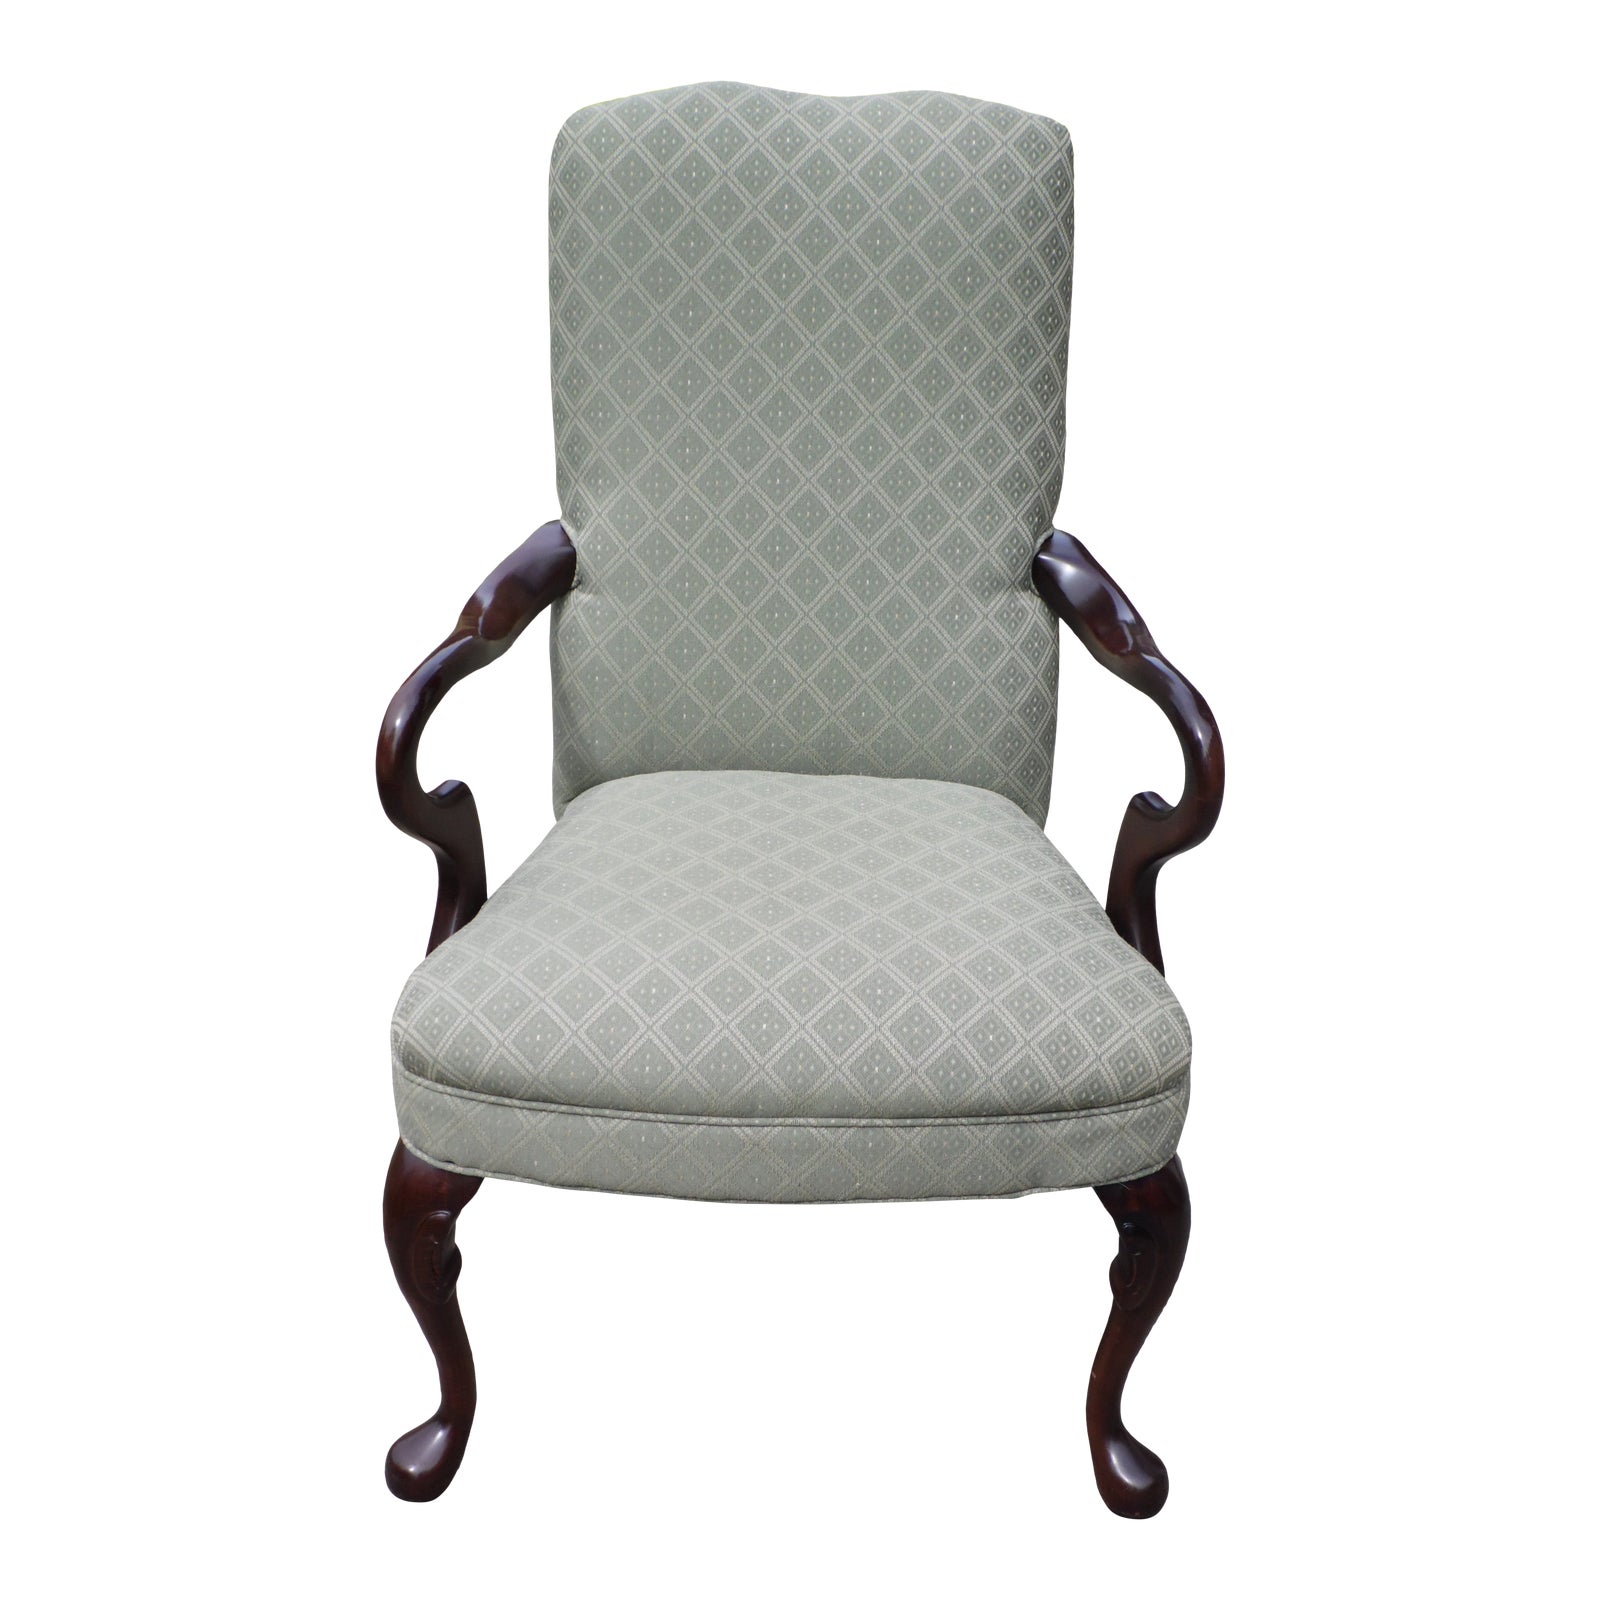 Masterfield Furniture Co Queen Anne Style Upholstered Arm Chair